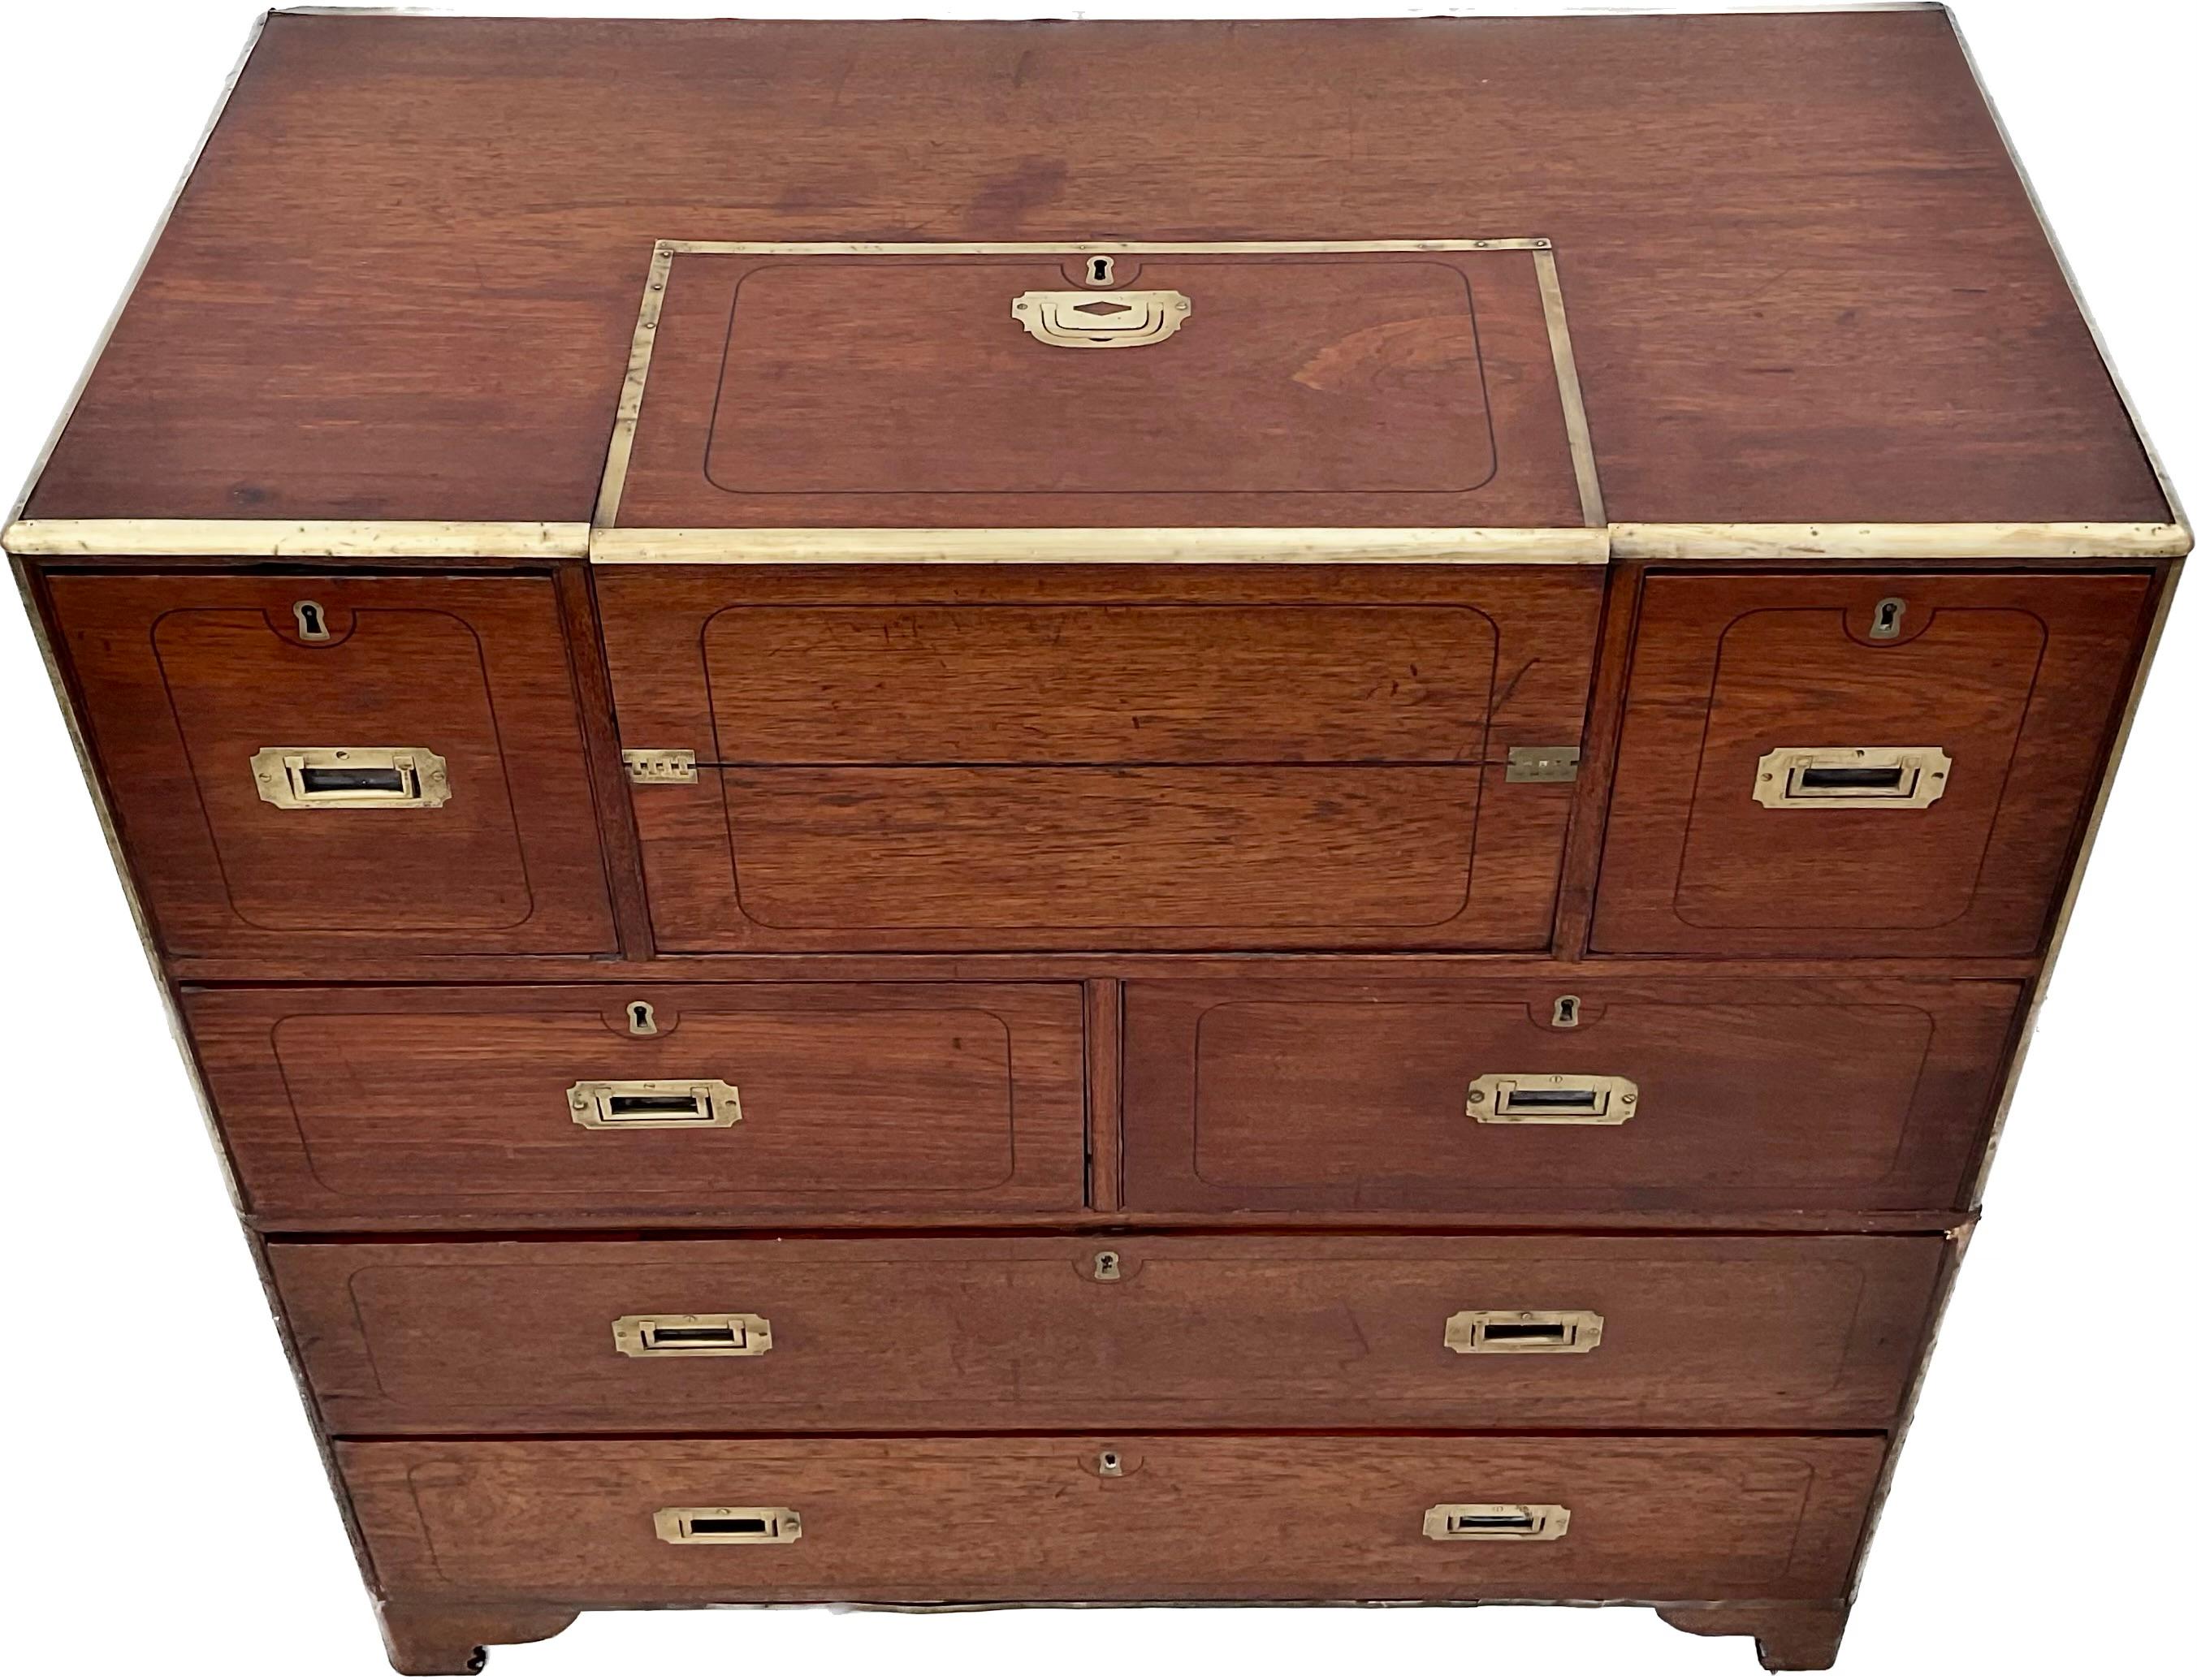 Wood English Campaign Chest With Integrated Writing Desk For Sale